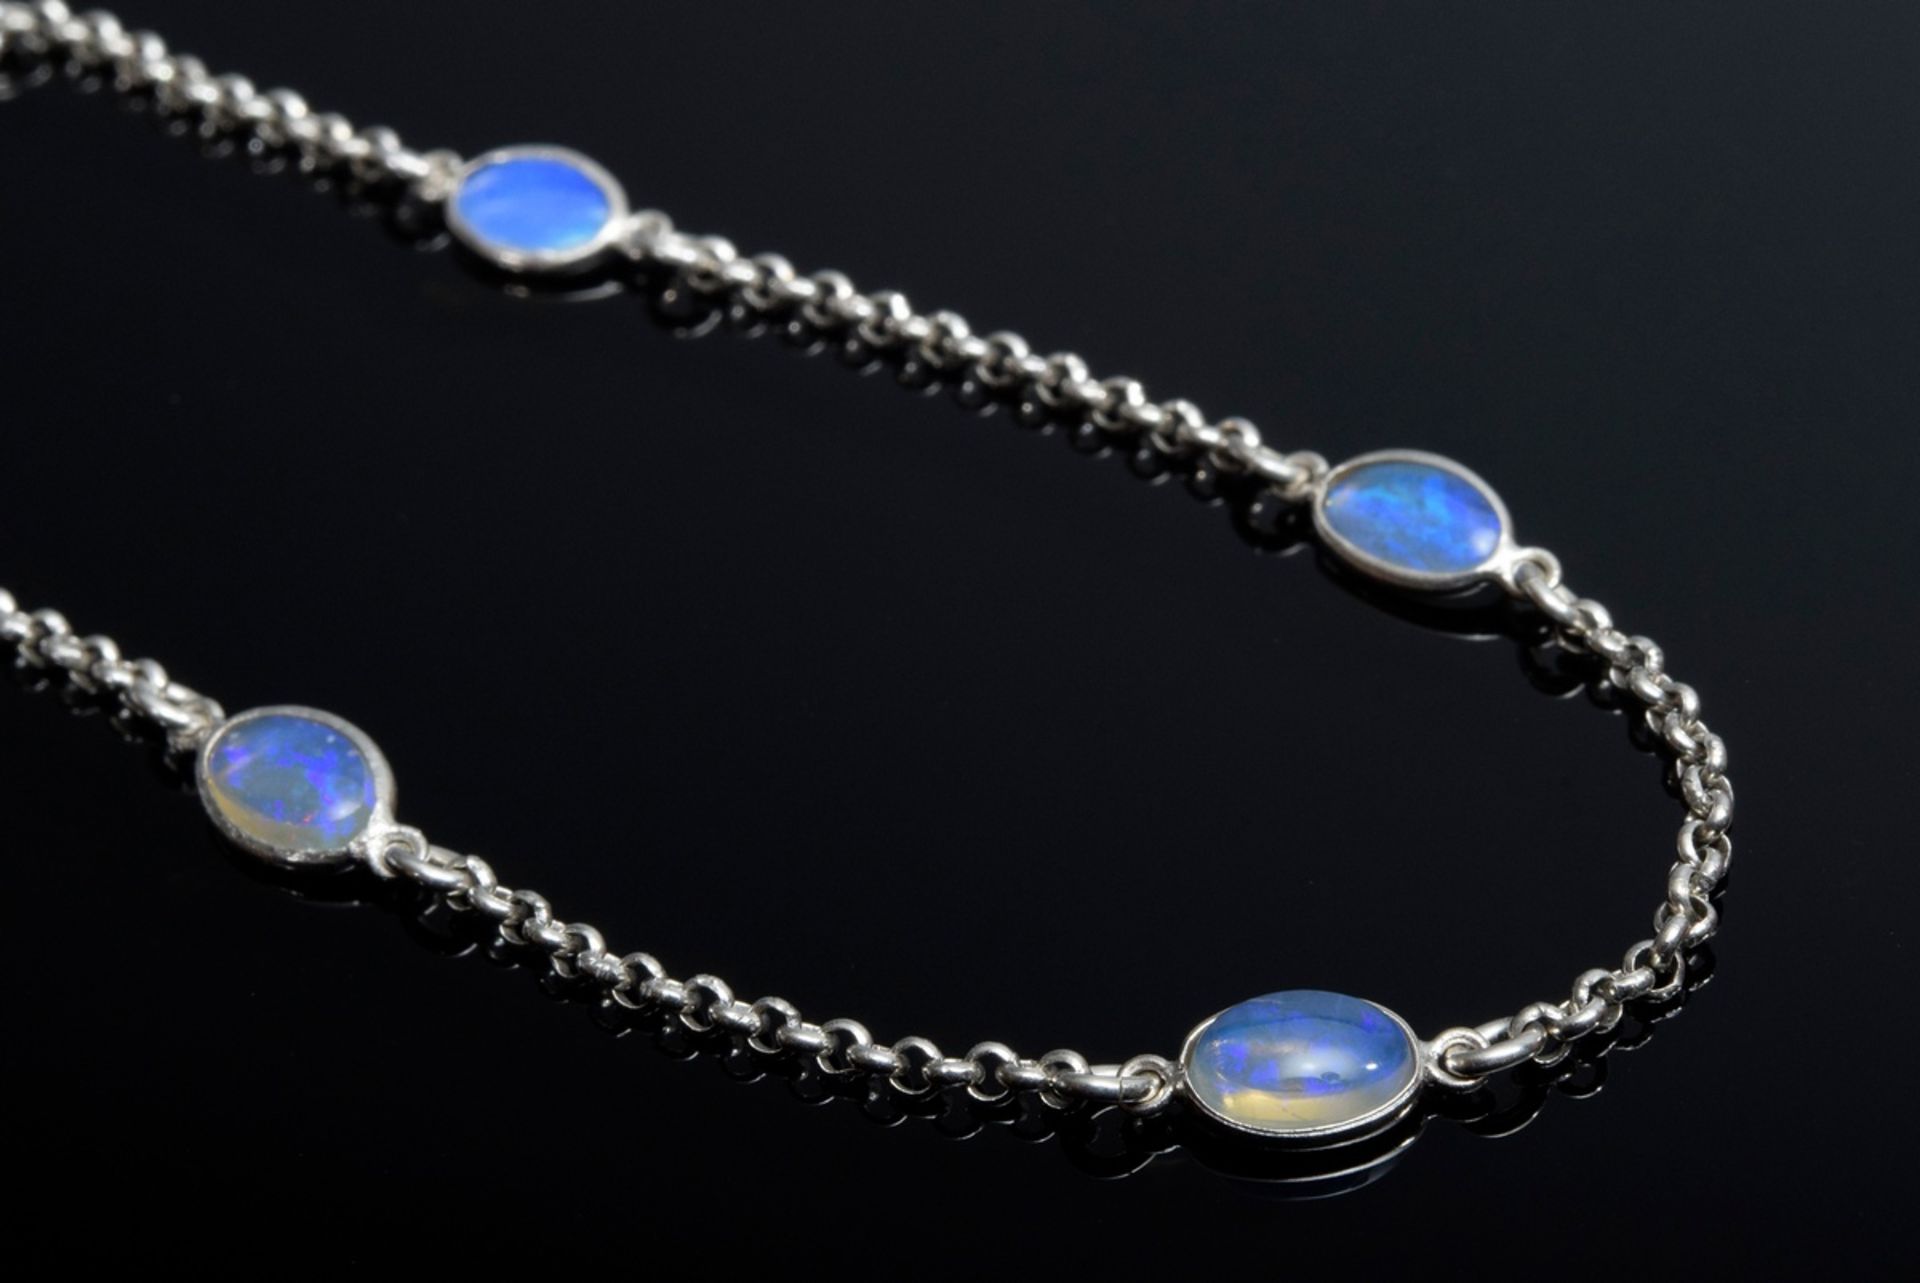 Zarte Silber 925 Kette mit Opal Cabochons, L. | Delicate silver 925 necklace with opal cabochons, - Image 3 of 3